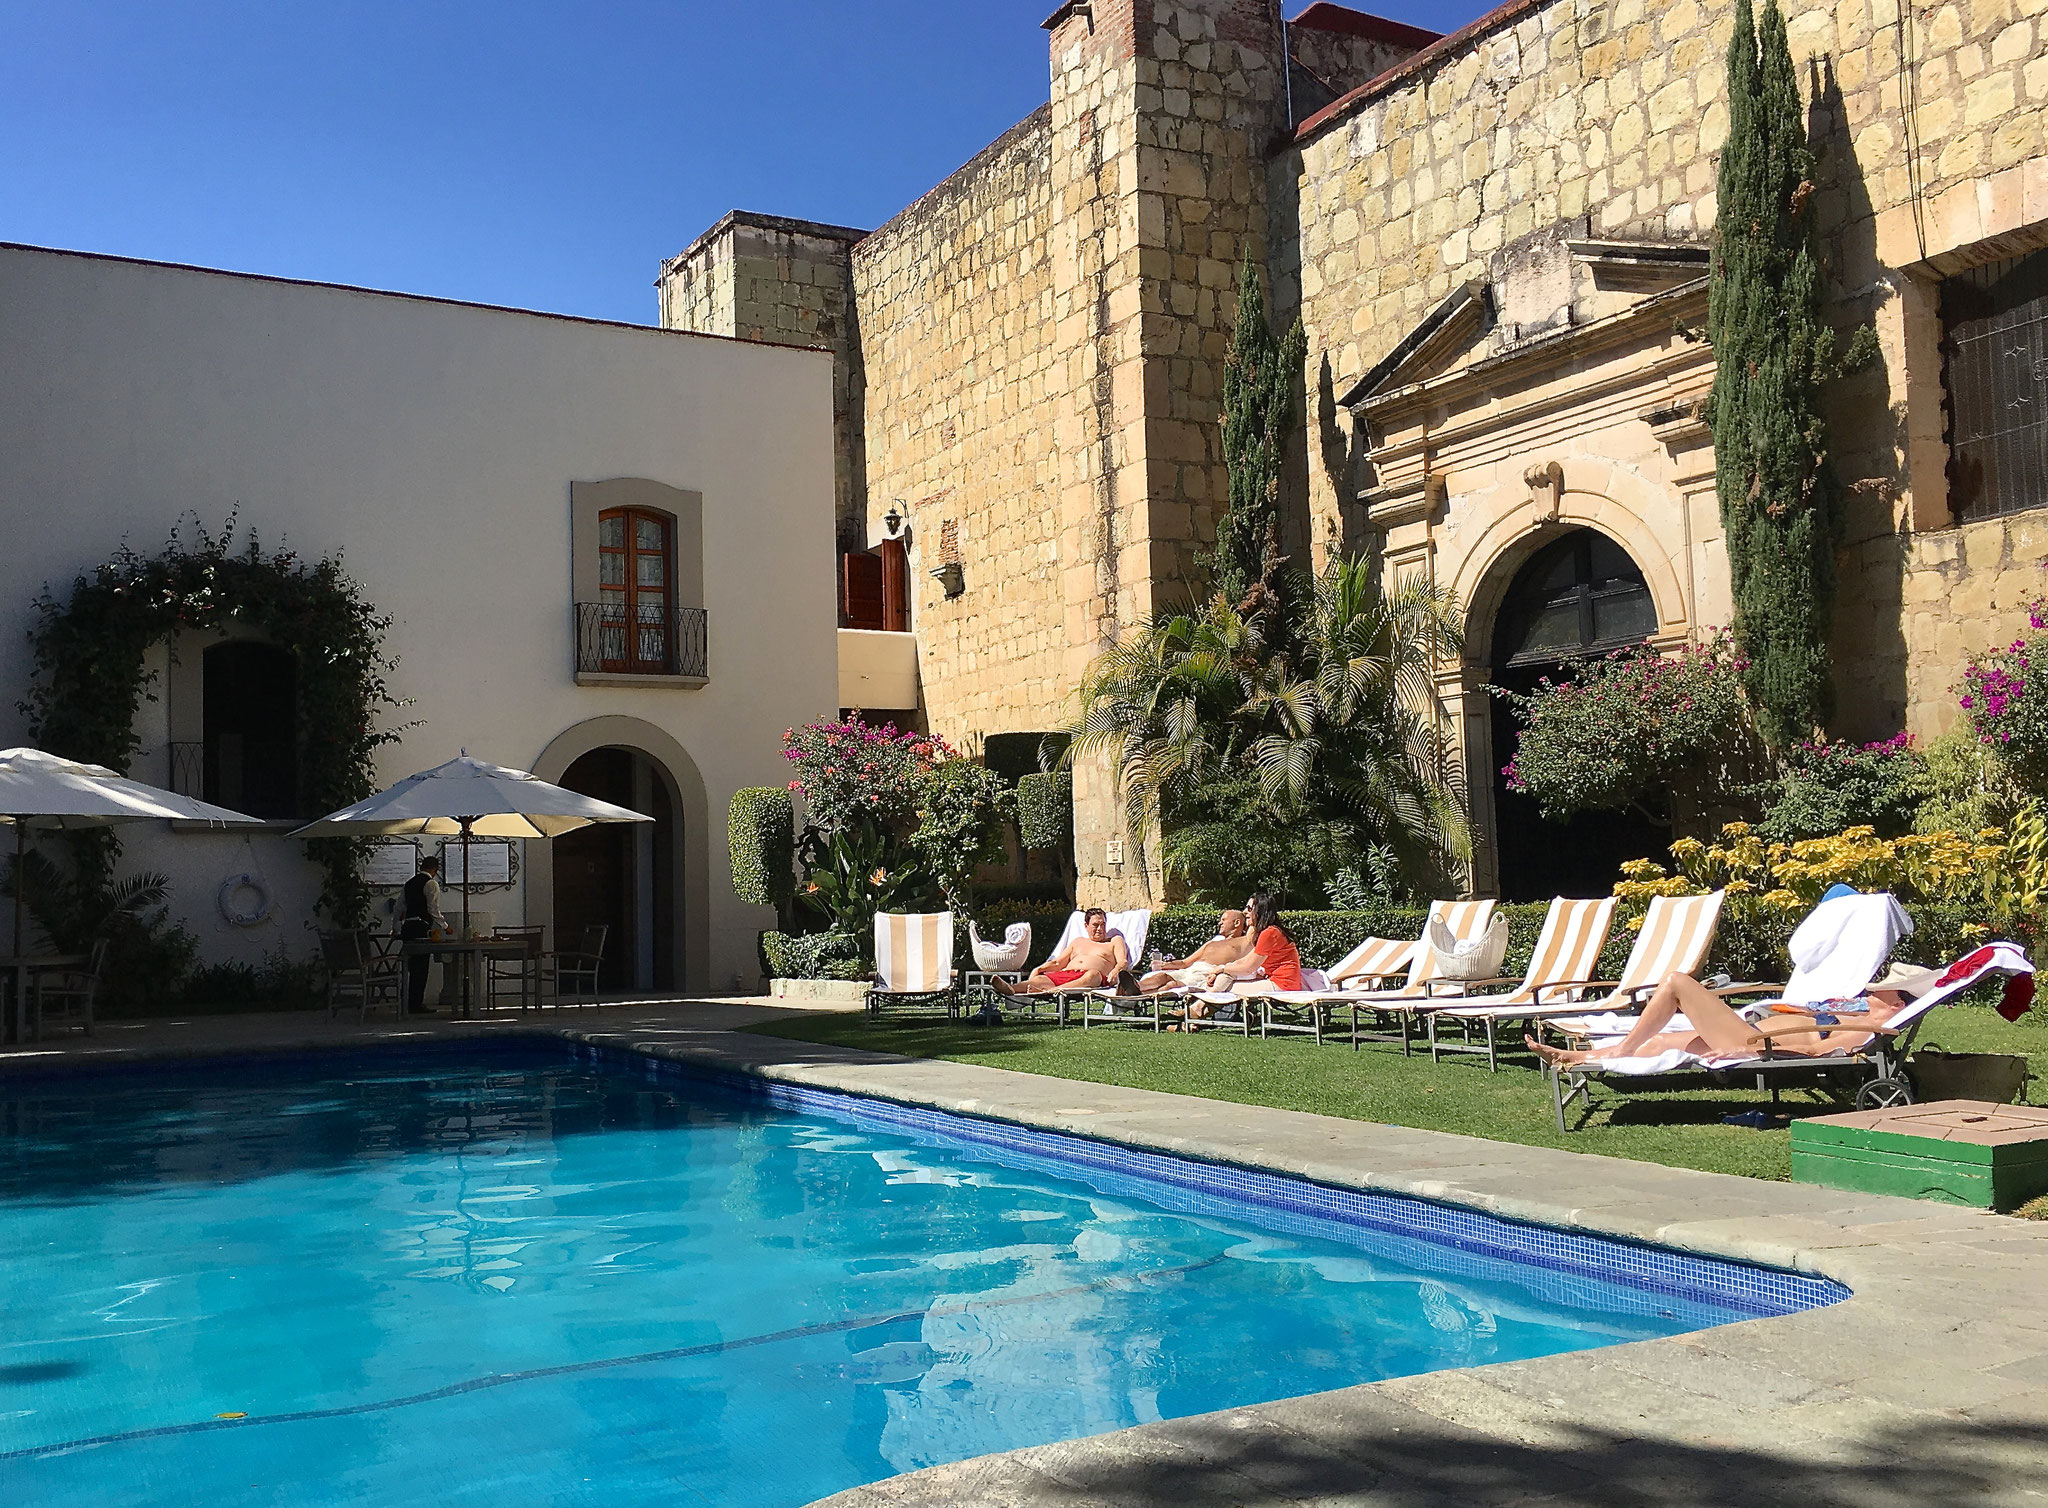 Our hotel, an old 16th century convent, Quinta Real